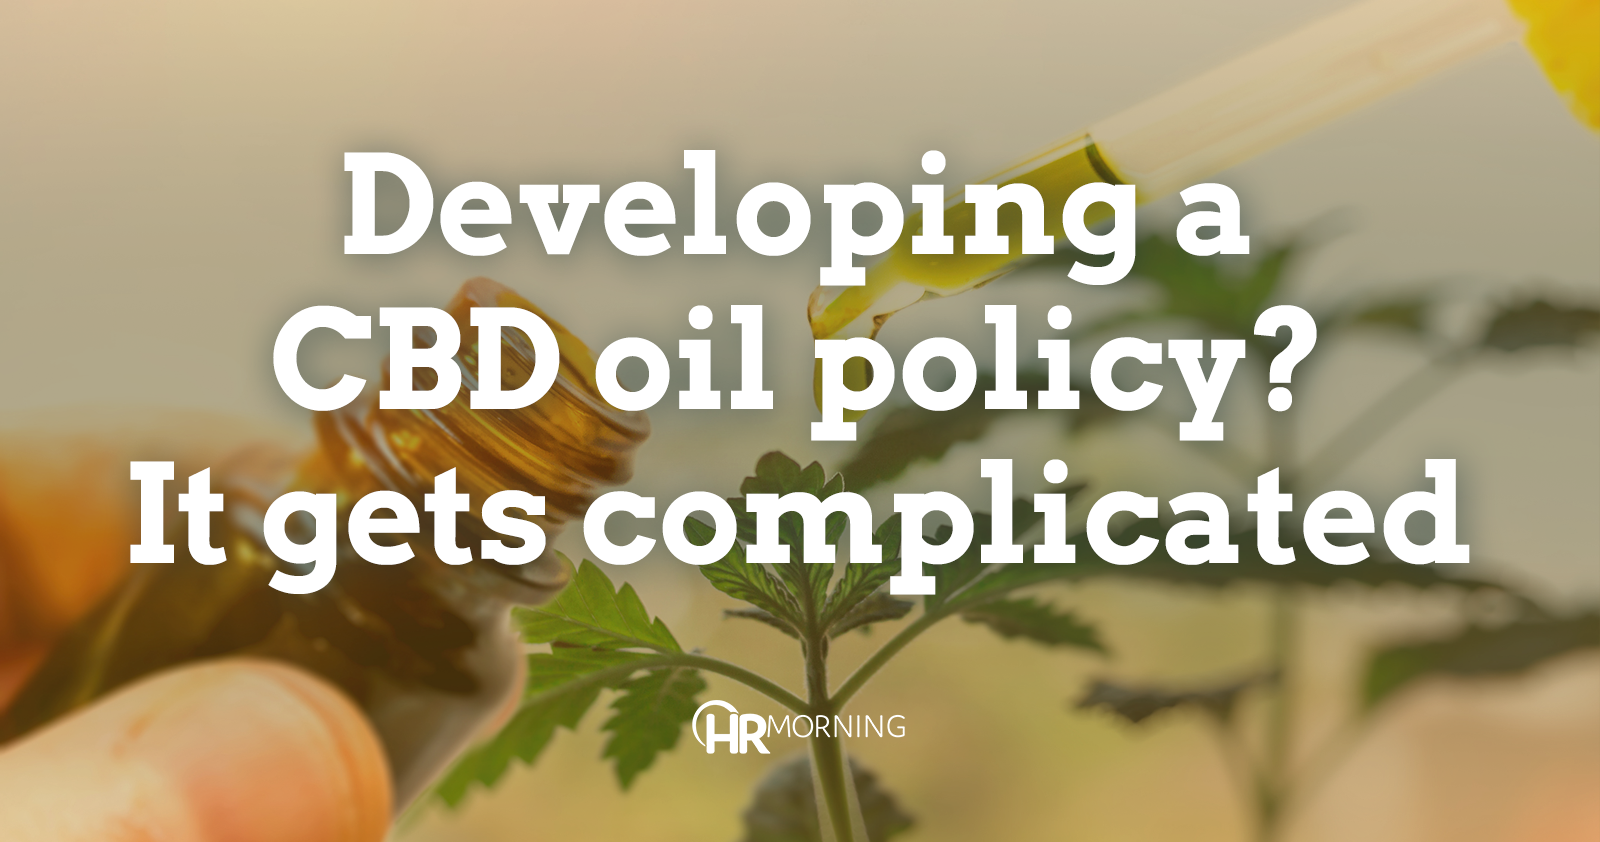 Developing a CBD oil policy